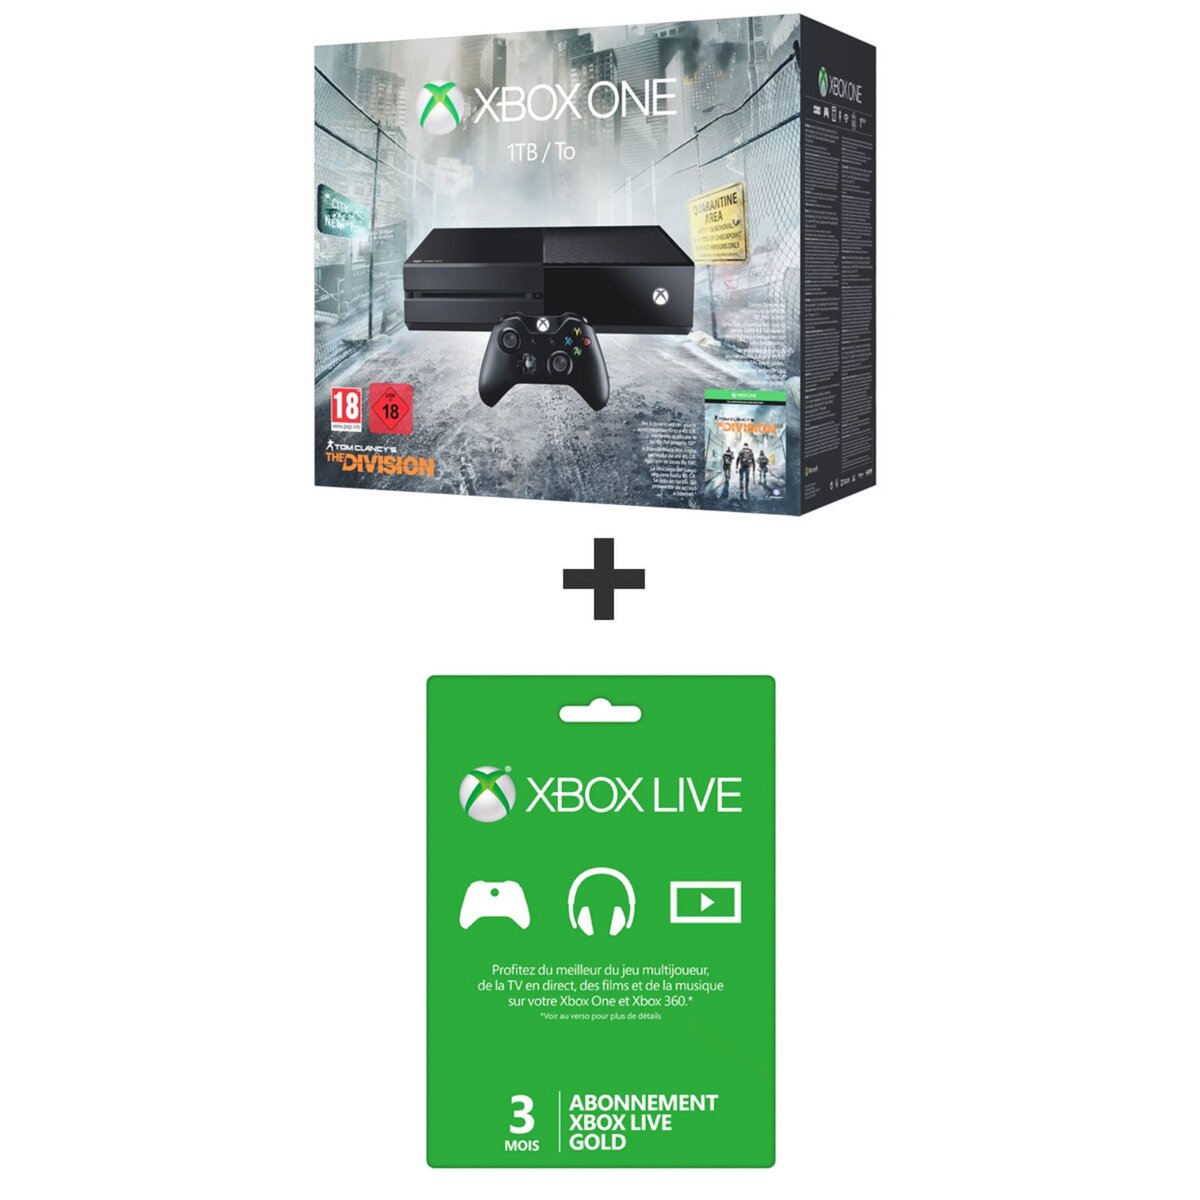 Xbox One 1 To + The Division + Abonnement 3 mois Xbox Live